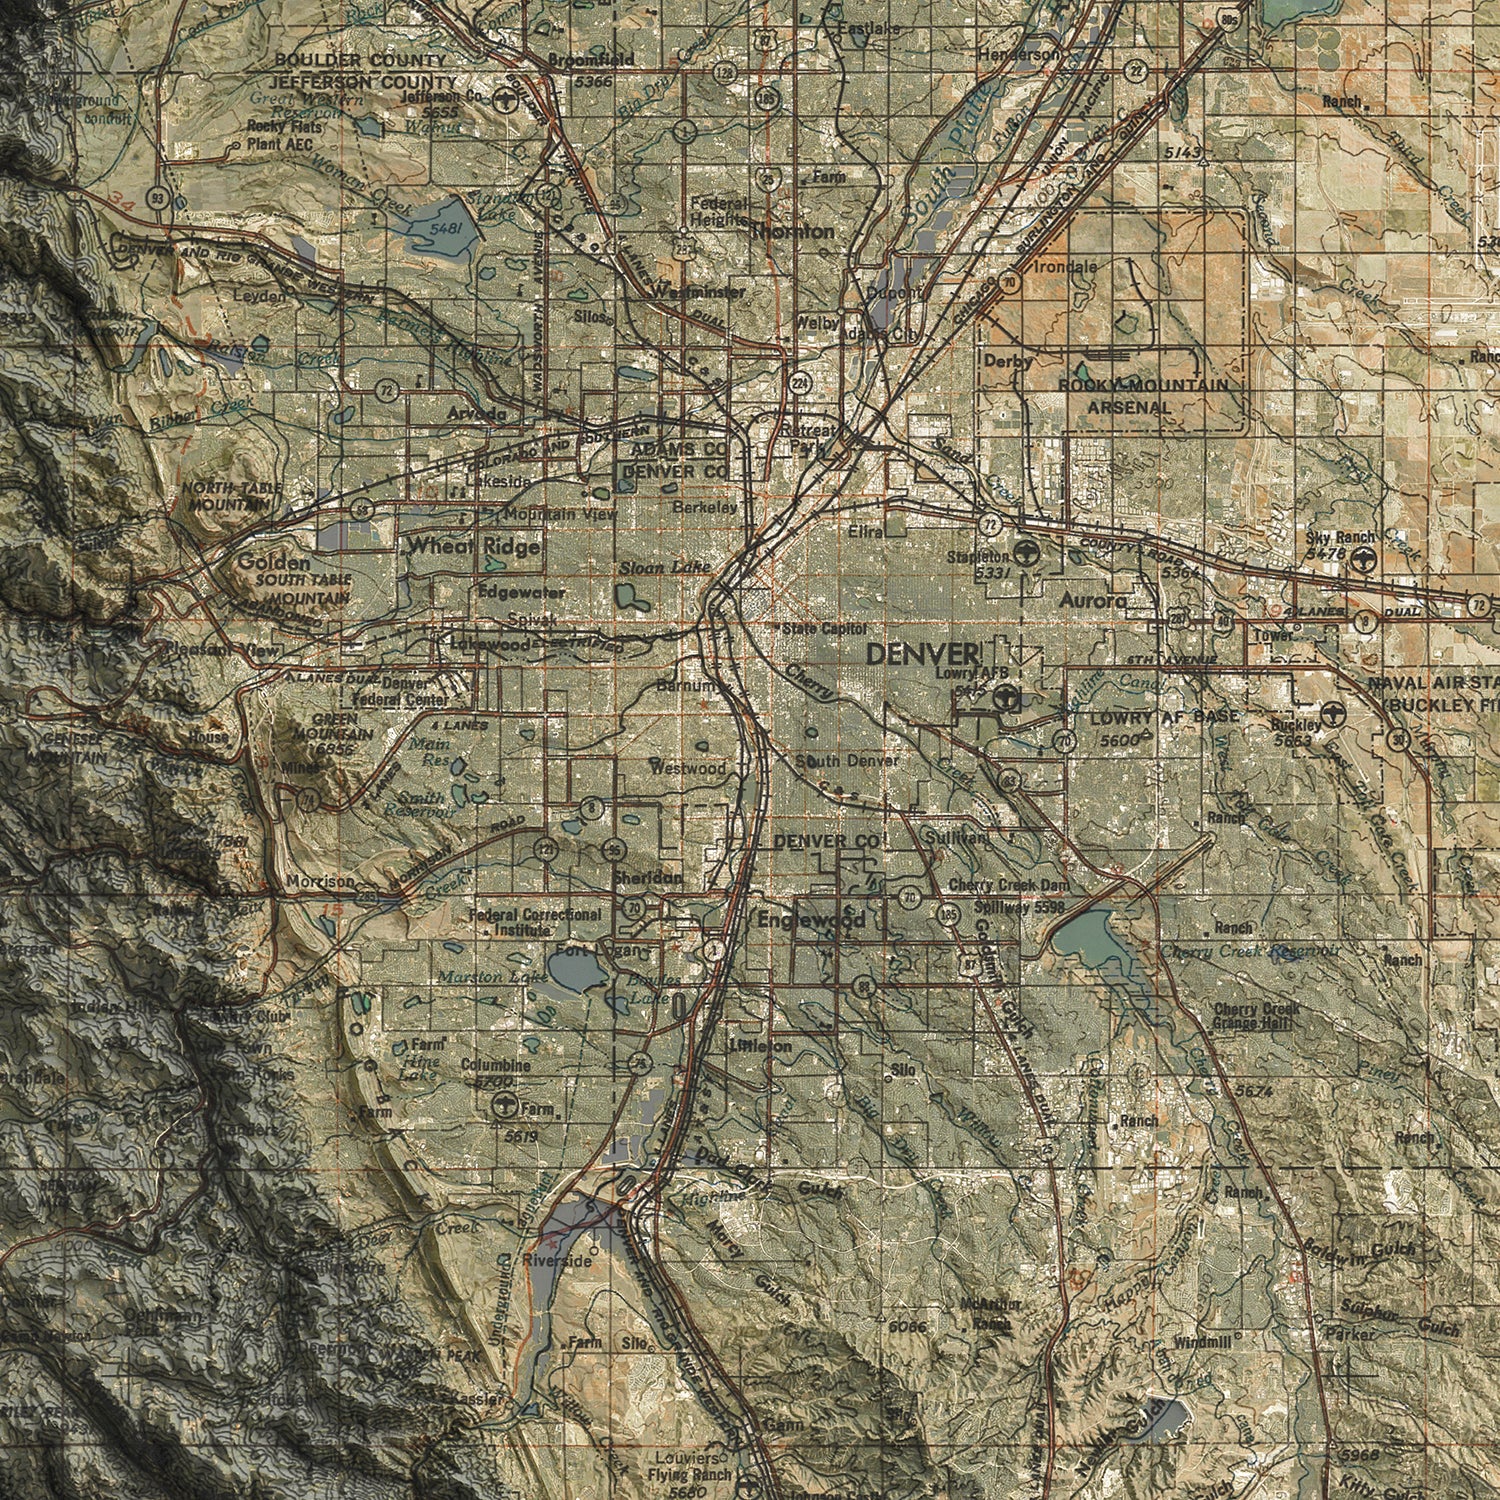 Denver, CO - Vintage Shaded Relief Map (1964)